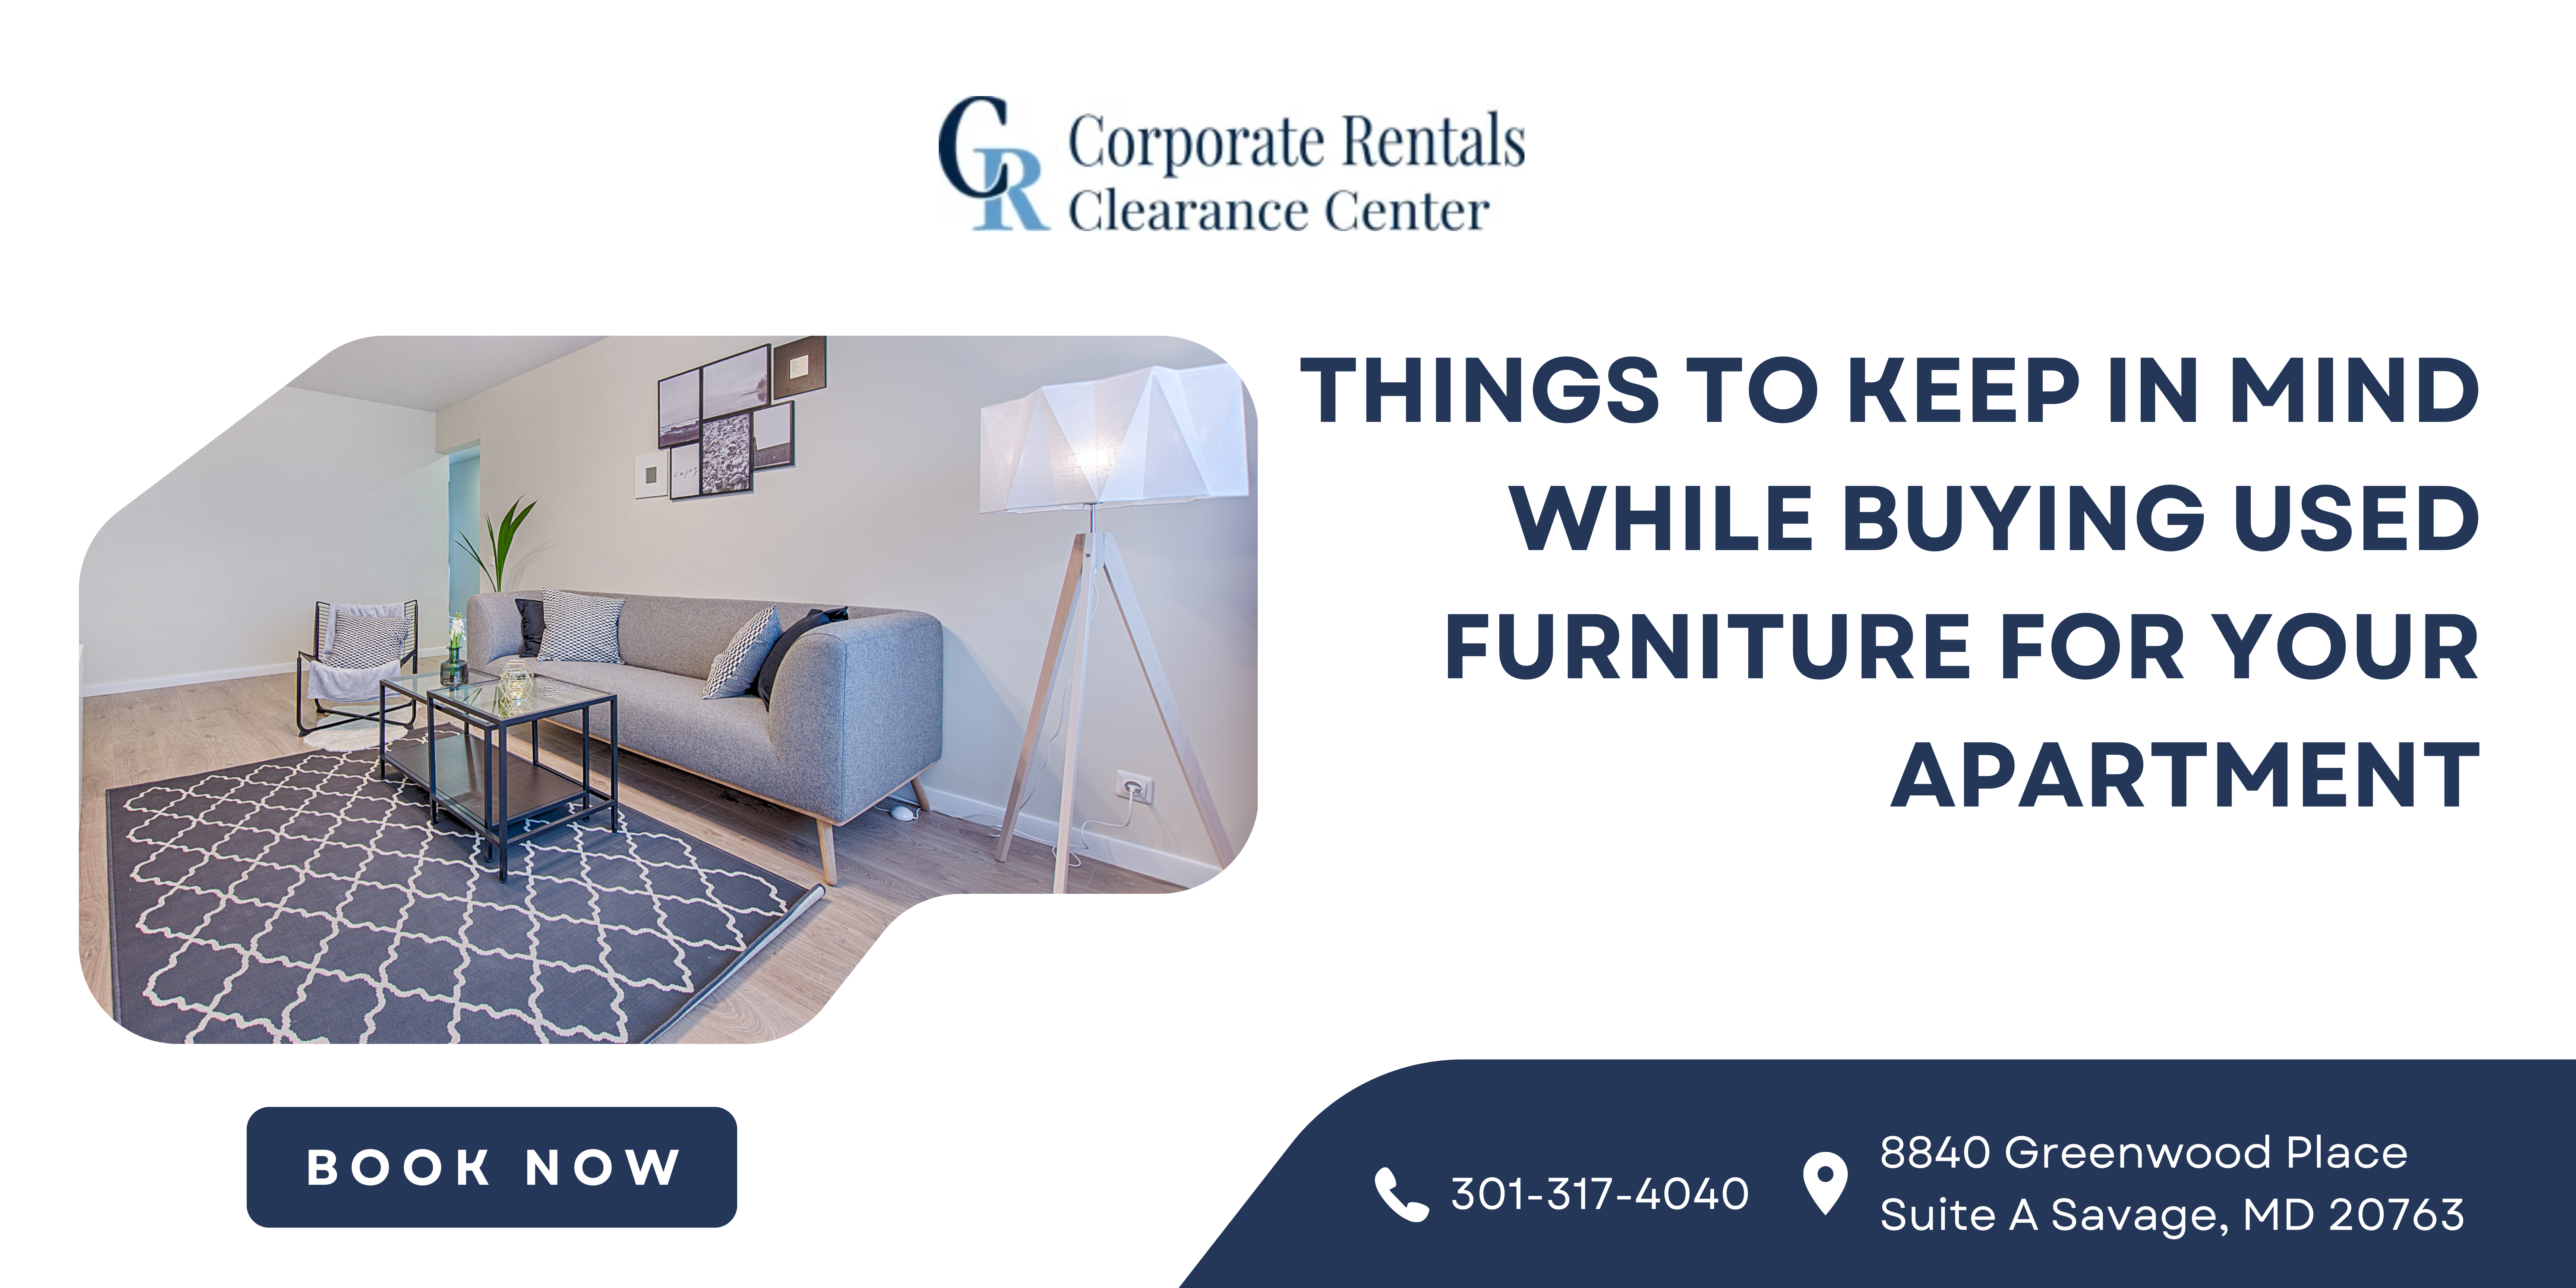 Things to Keep in Mind While Buying Used Furniture